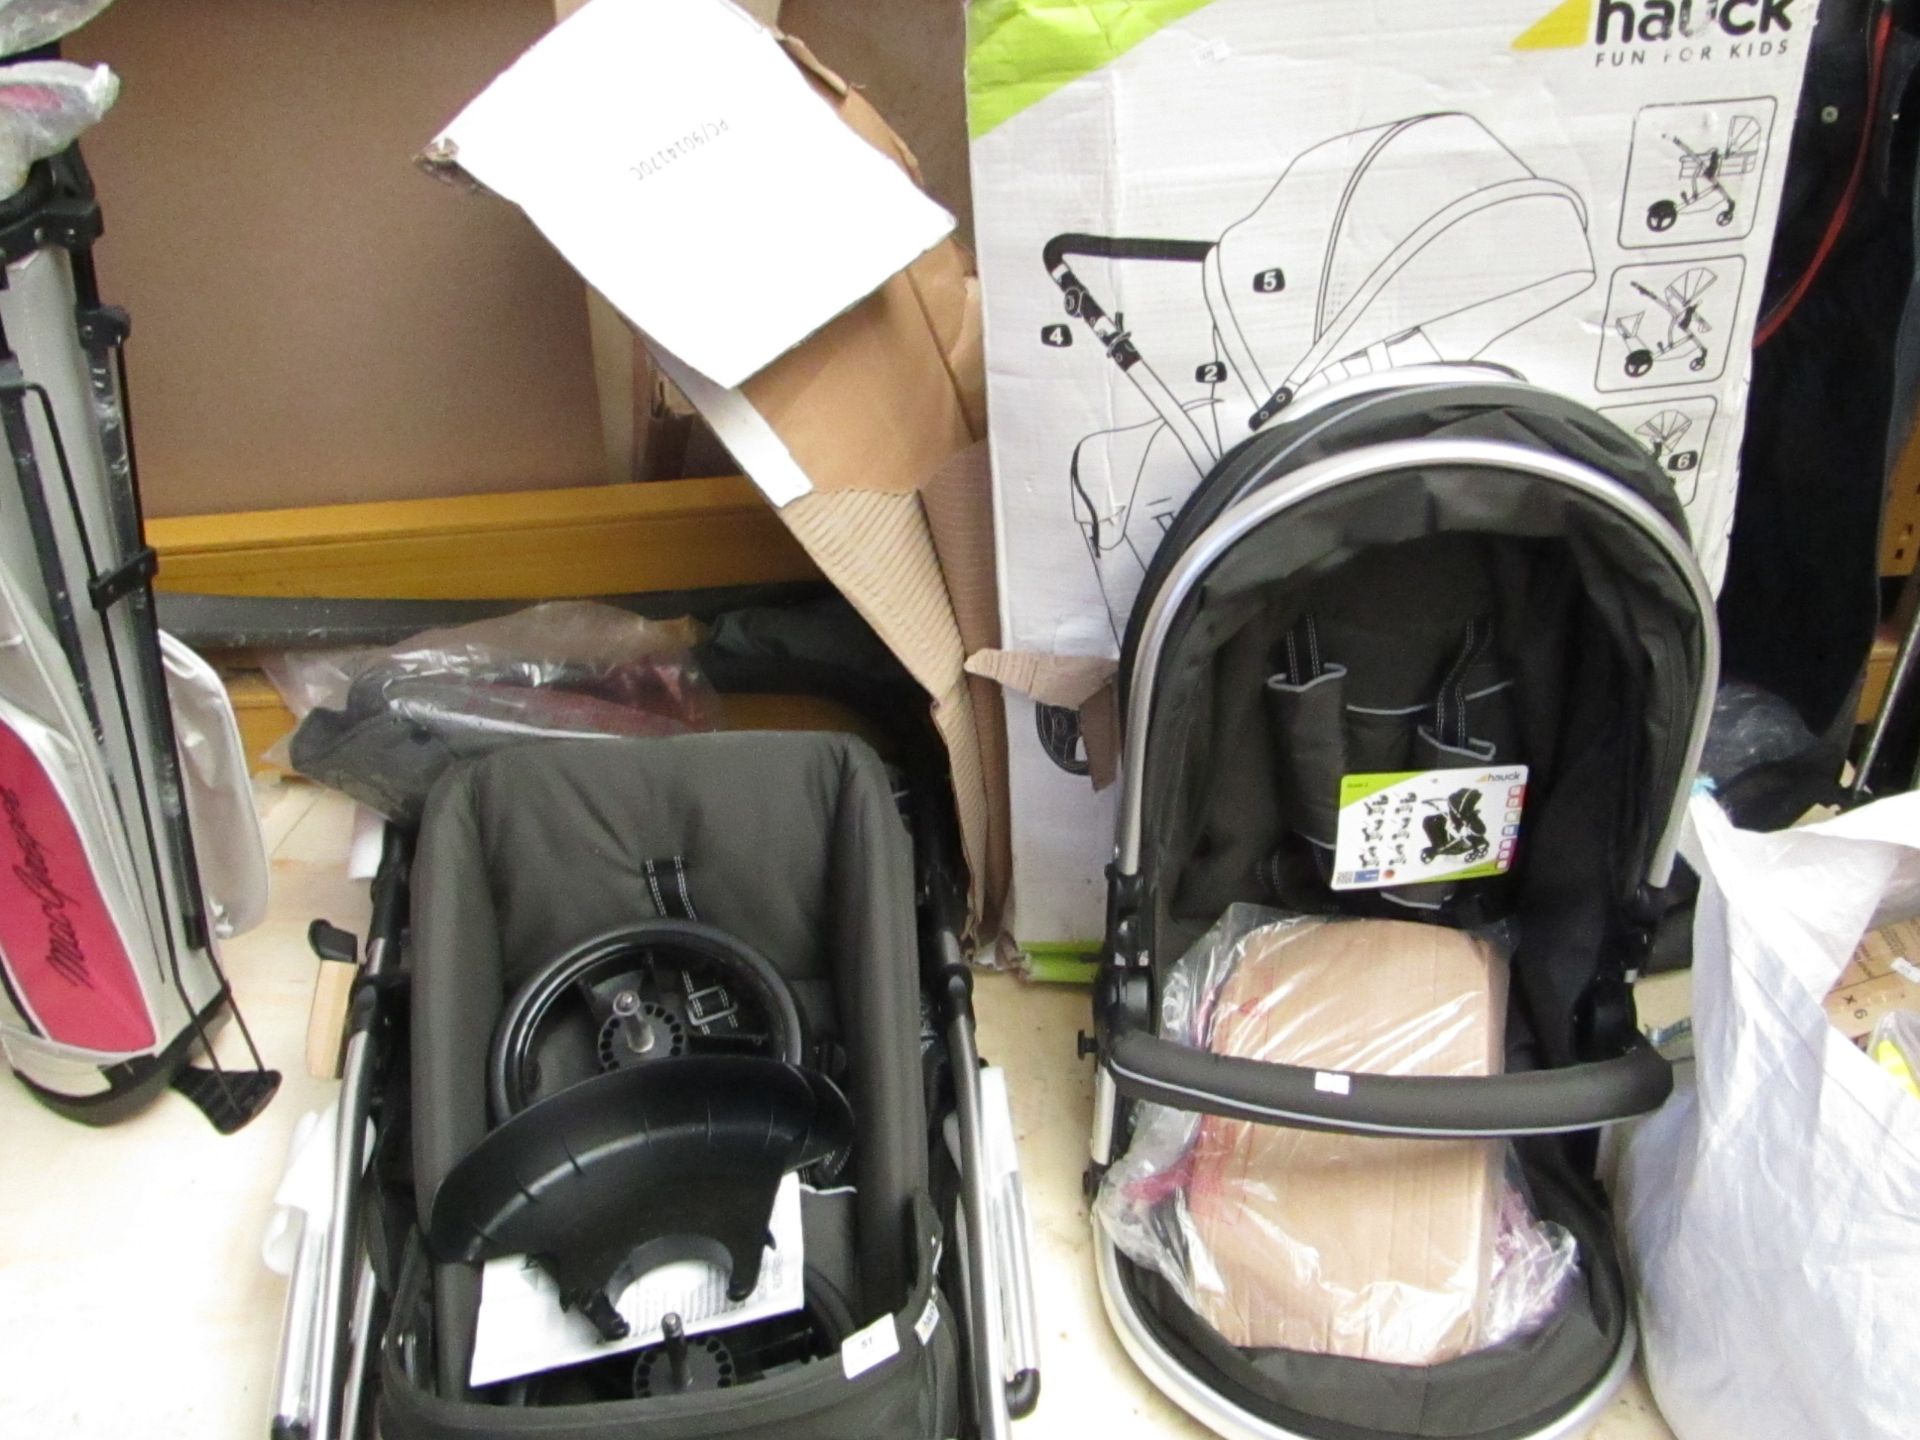 Hauk Duett 2 pram syatem, looks unsued with damaged packaging but is unchecked